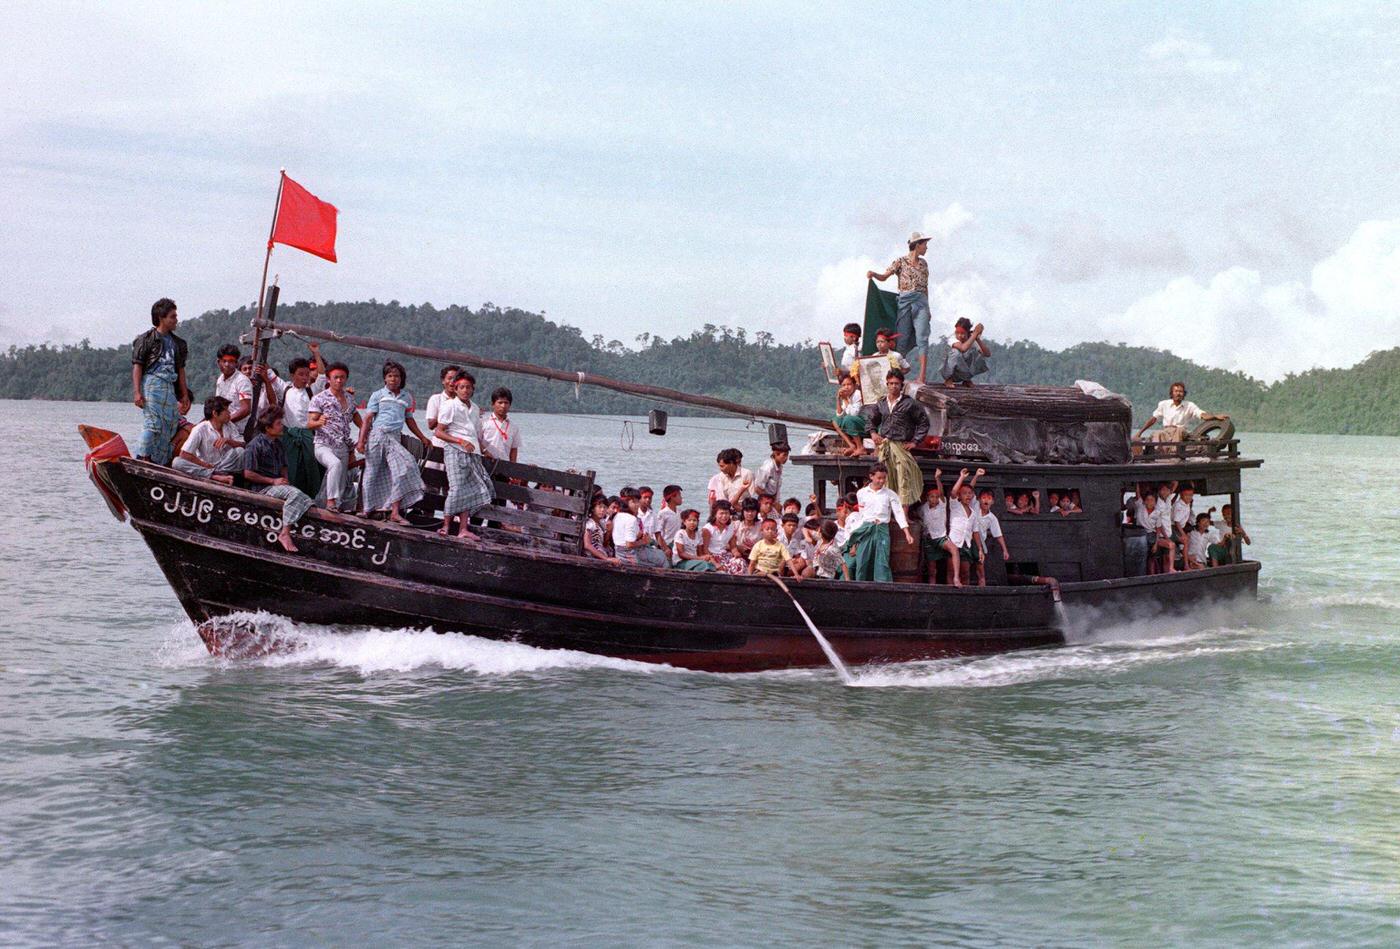 Burmese demonstrators on their way to Victoria Point during the 8888 Uprising, 1988.